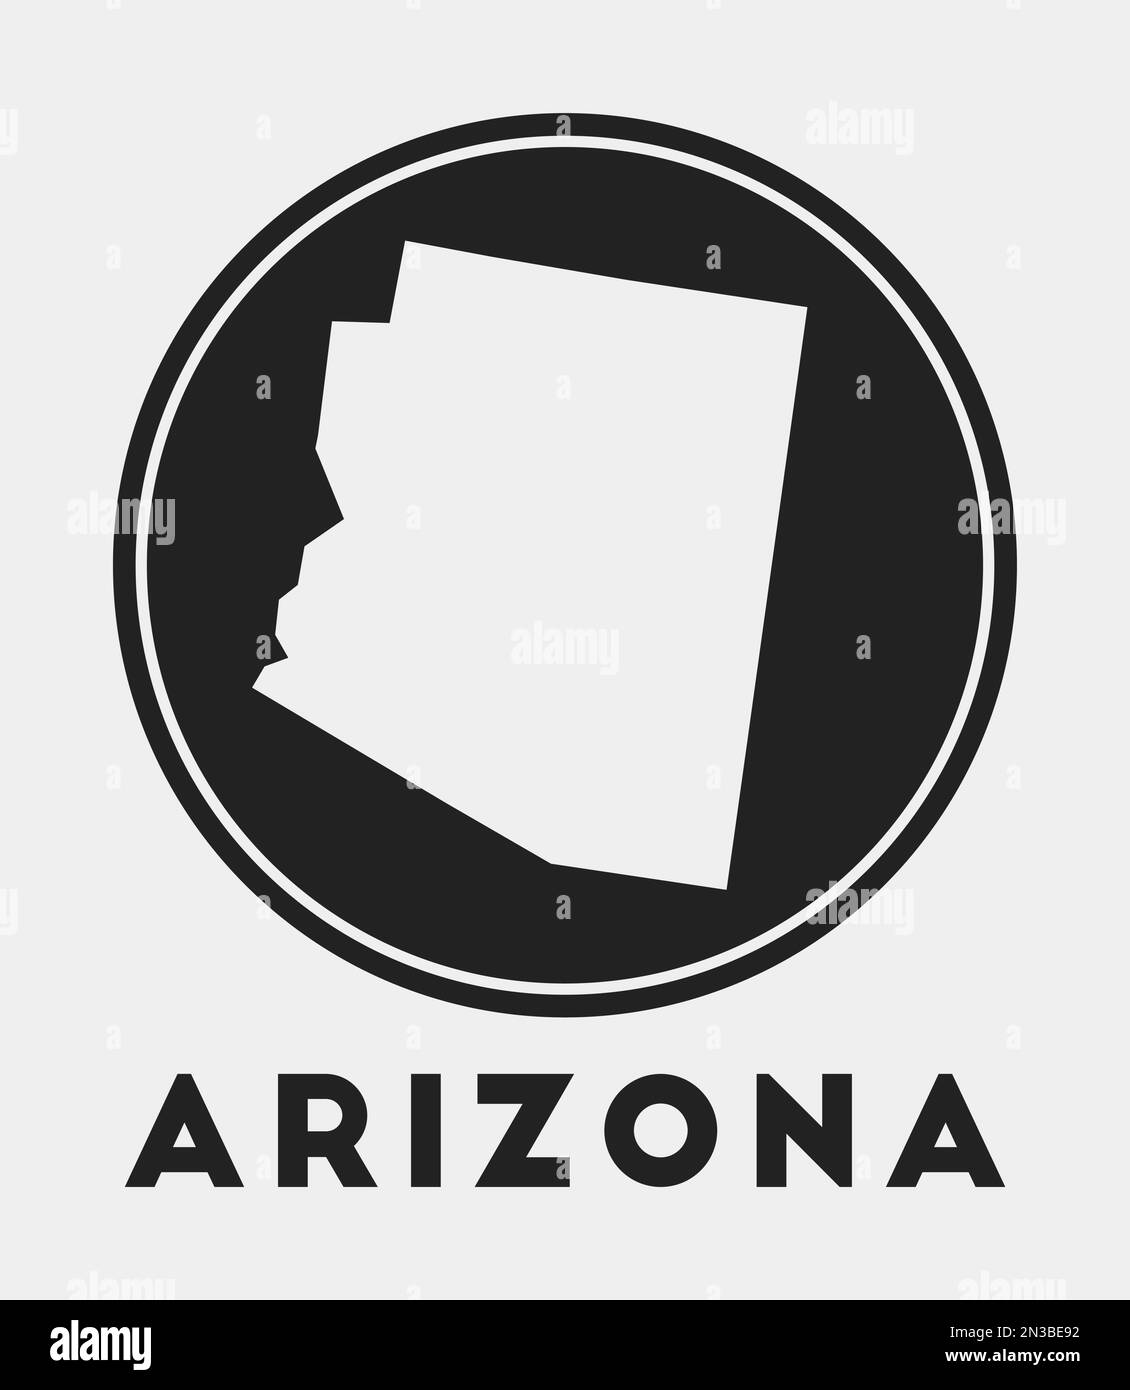 Arizona icon. Round logo with us state map and title. Stylish Arizona badge with map. Vector illustration. Stock Vector